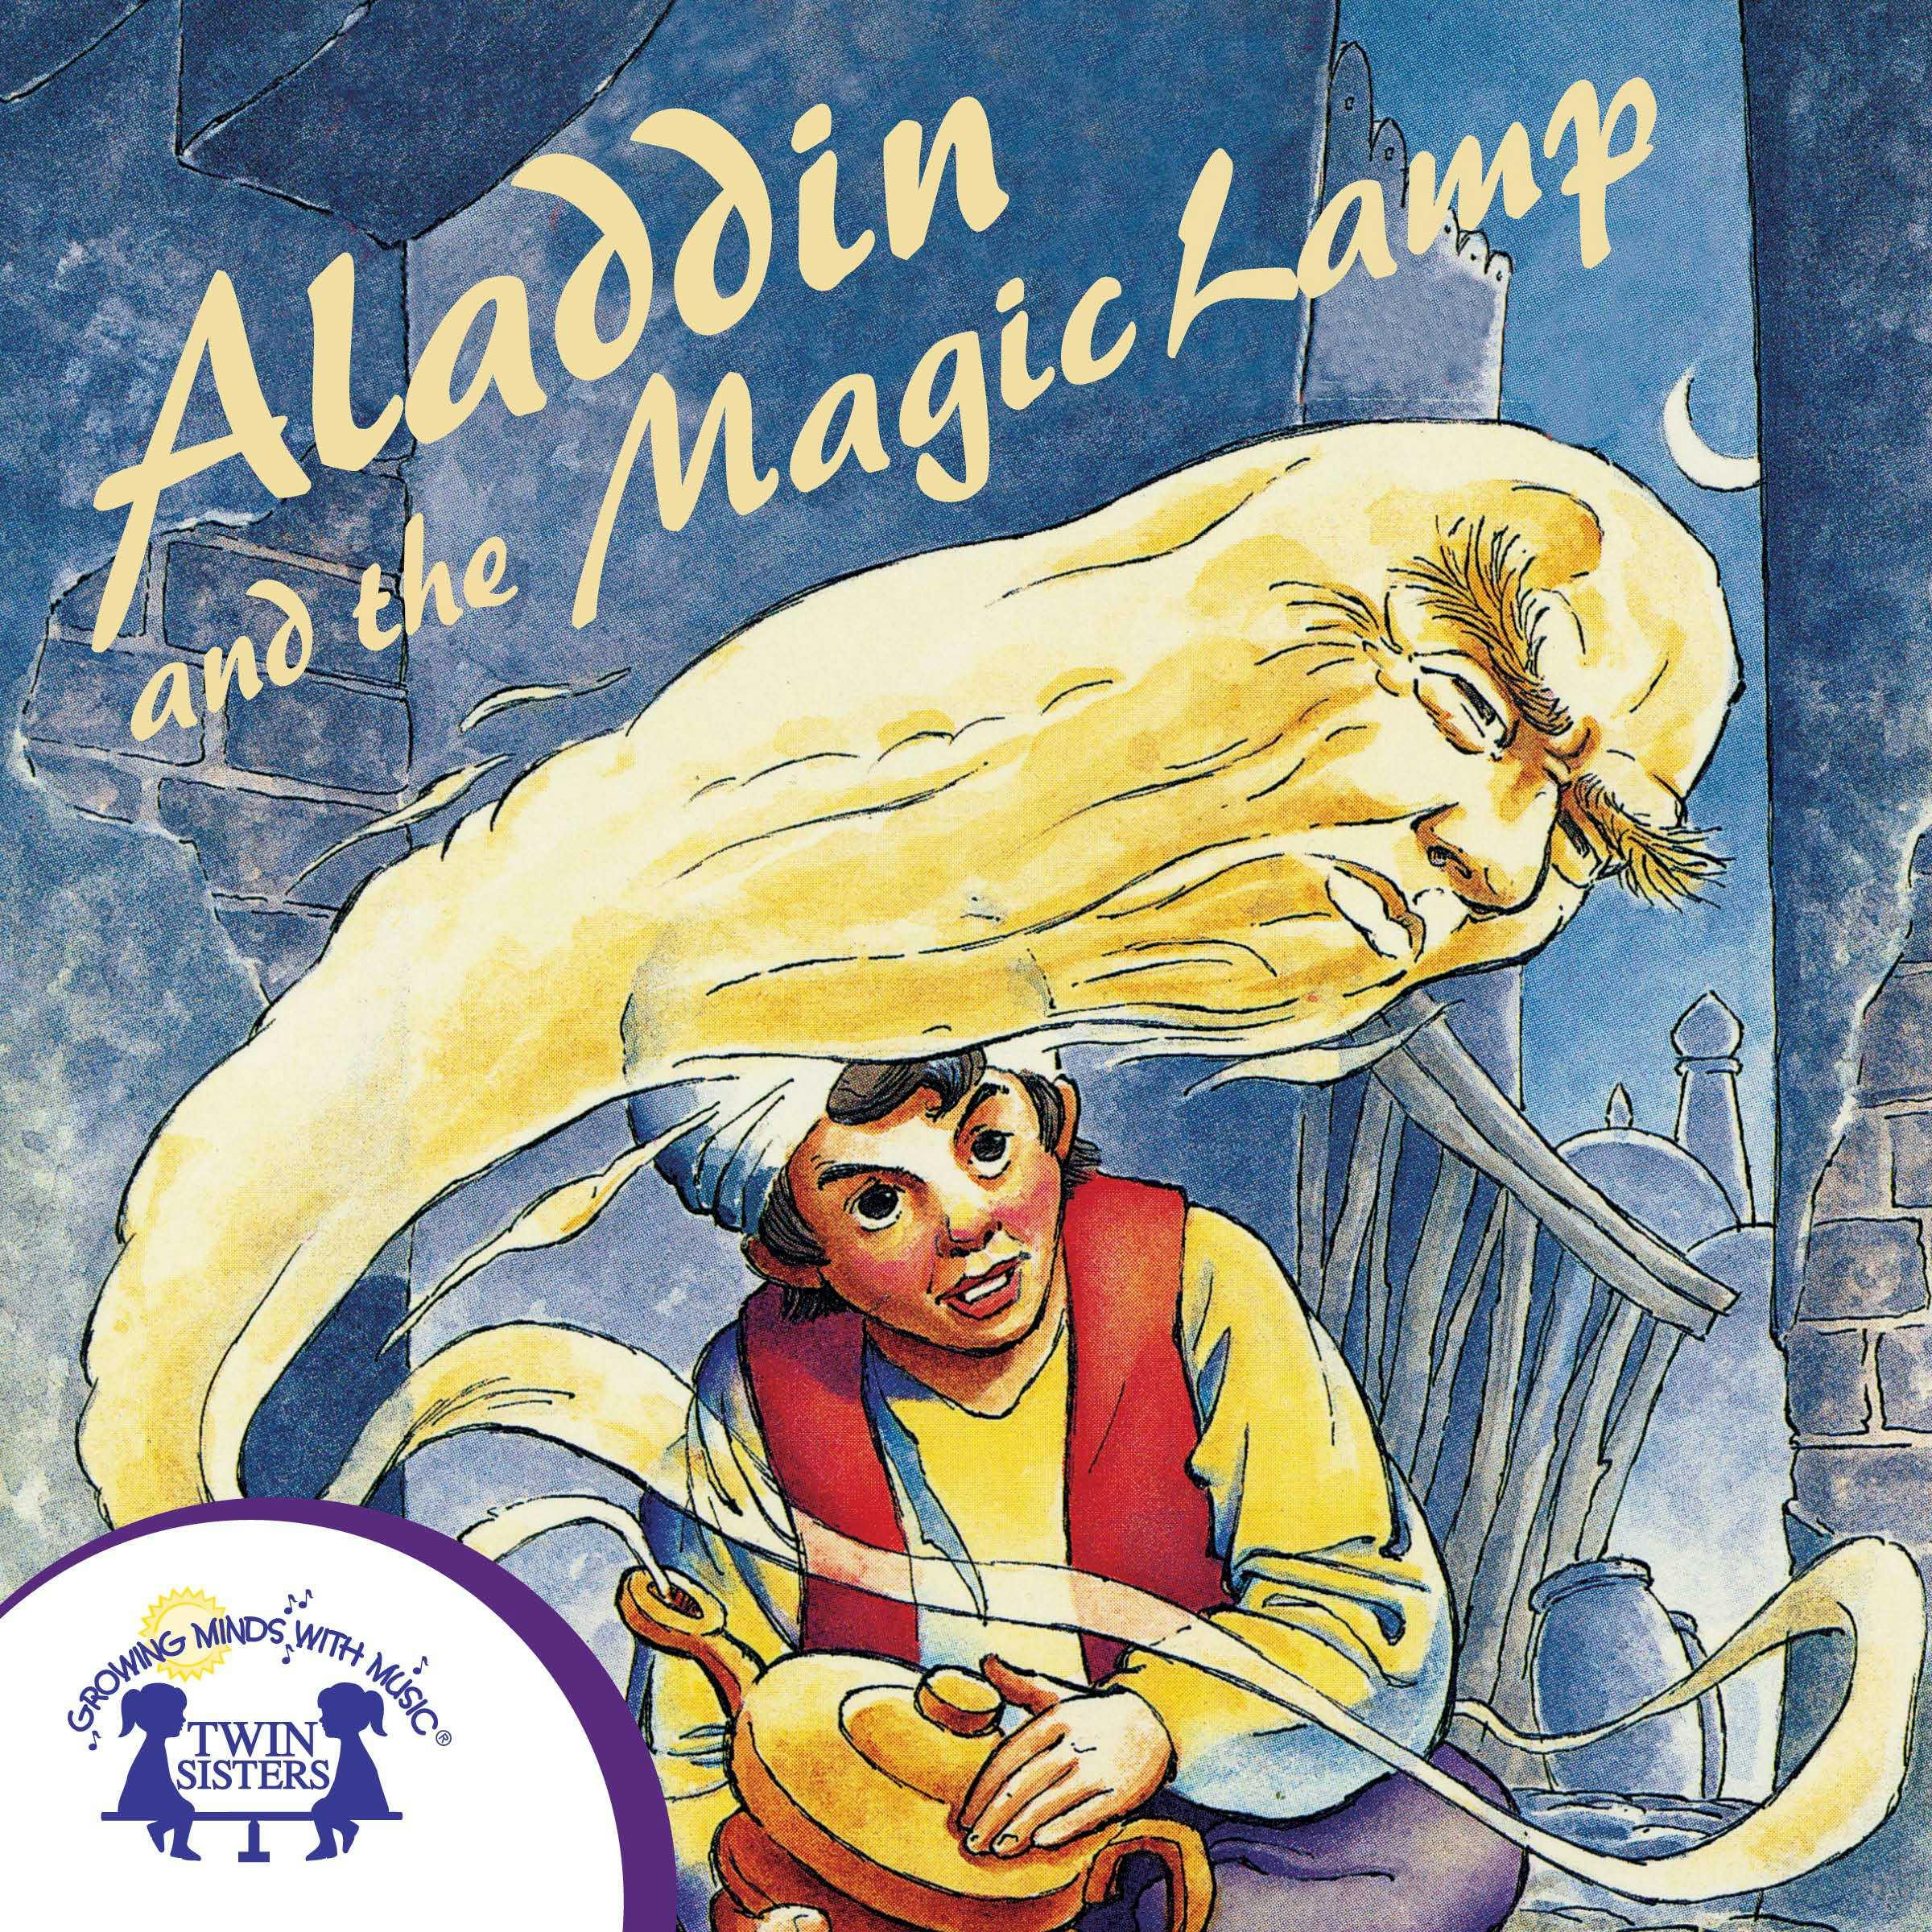 Aladdin and the Magic Lamp - undefined